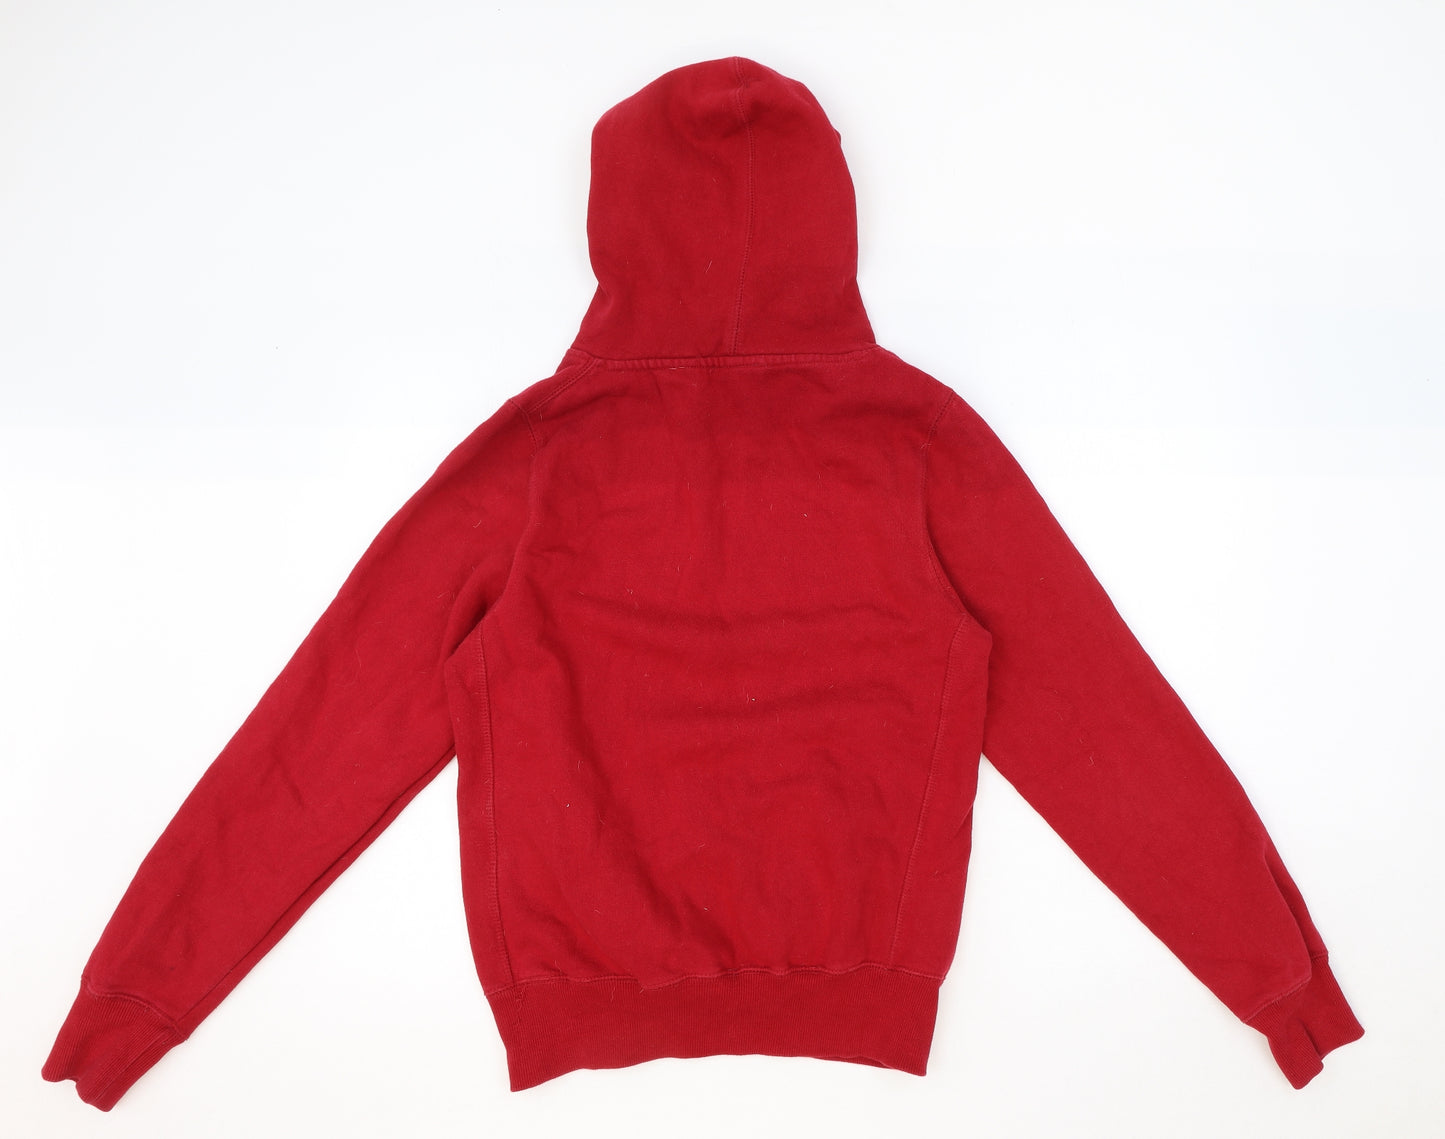 Car-Fest Mens Red Cotton Pullover Hoodie Size S